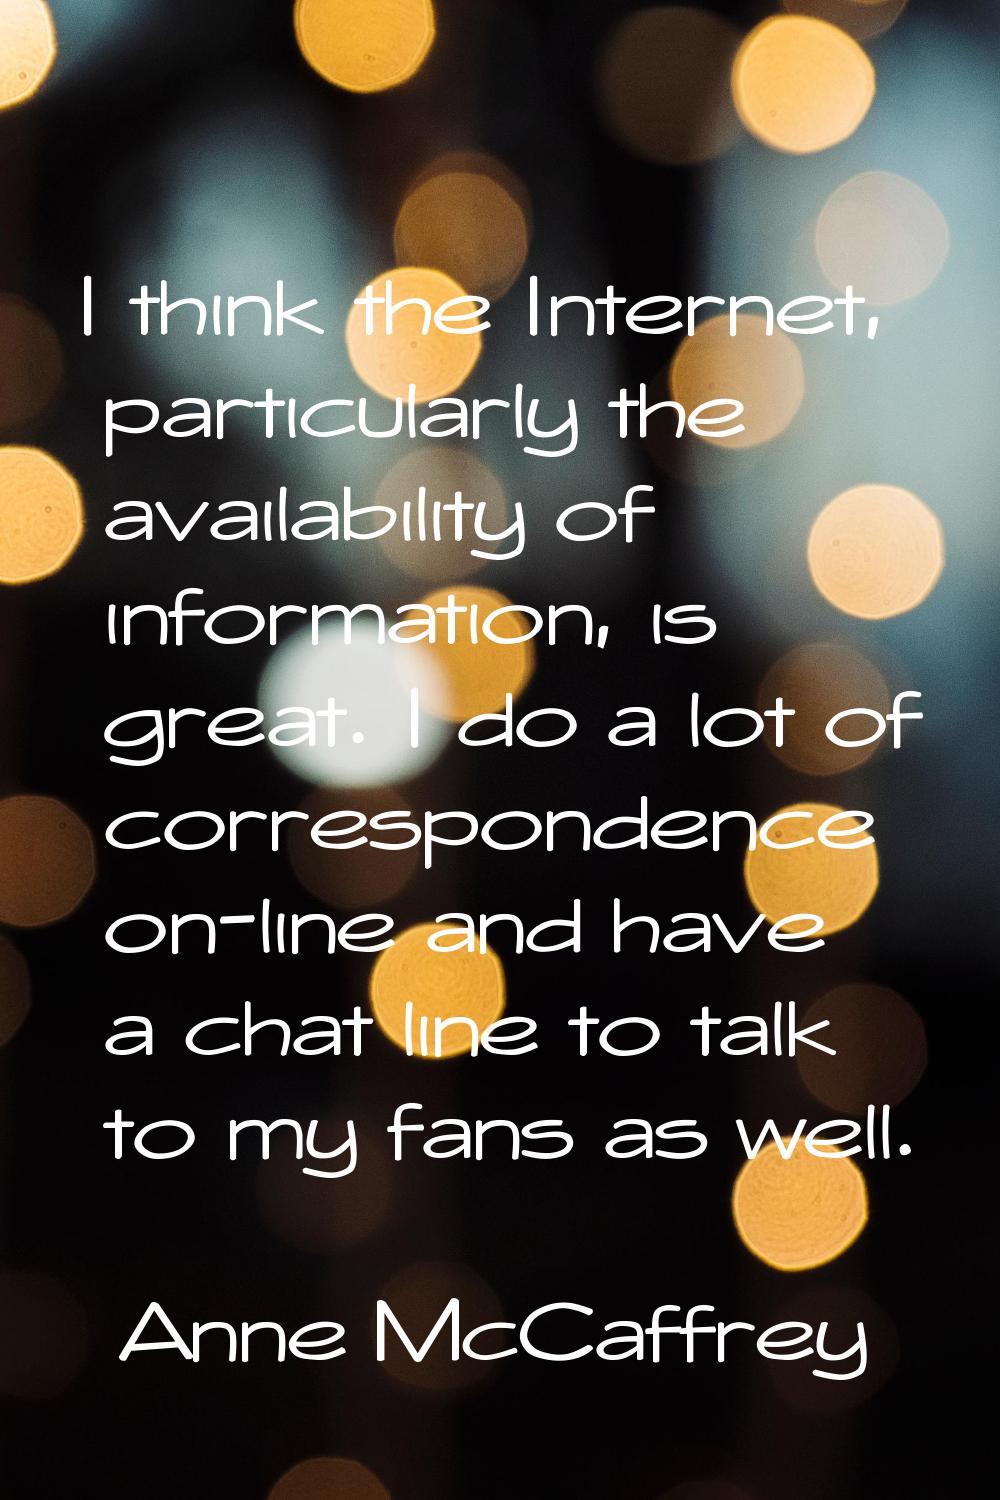 I think the Internet, particularly the availability of information, is great. I do a lot of corresp